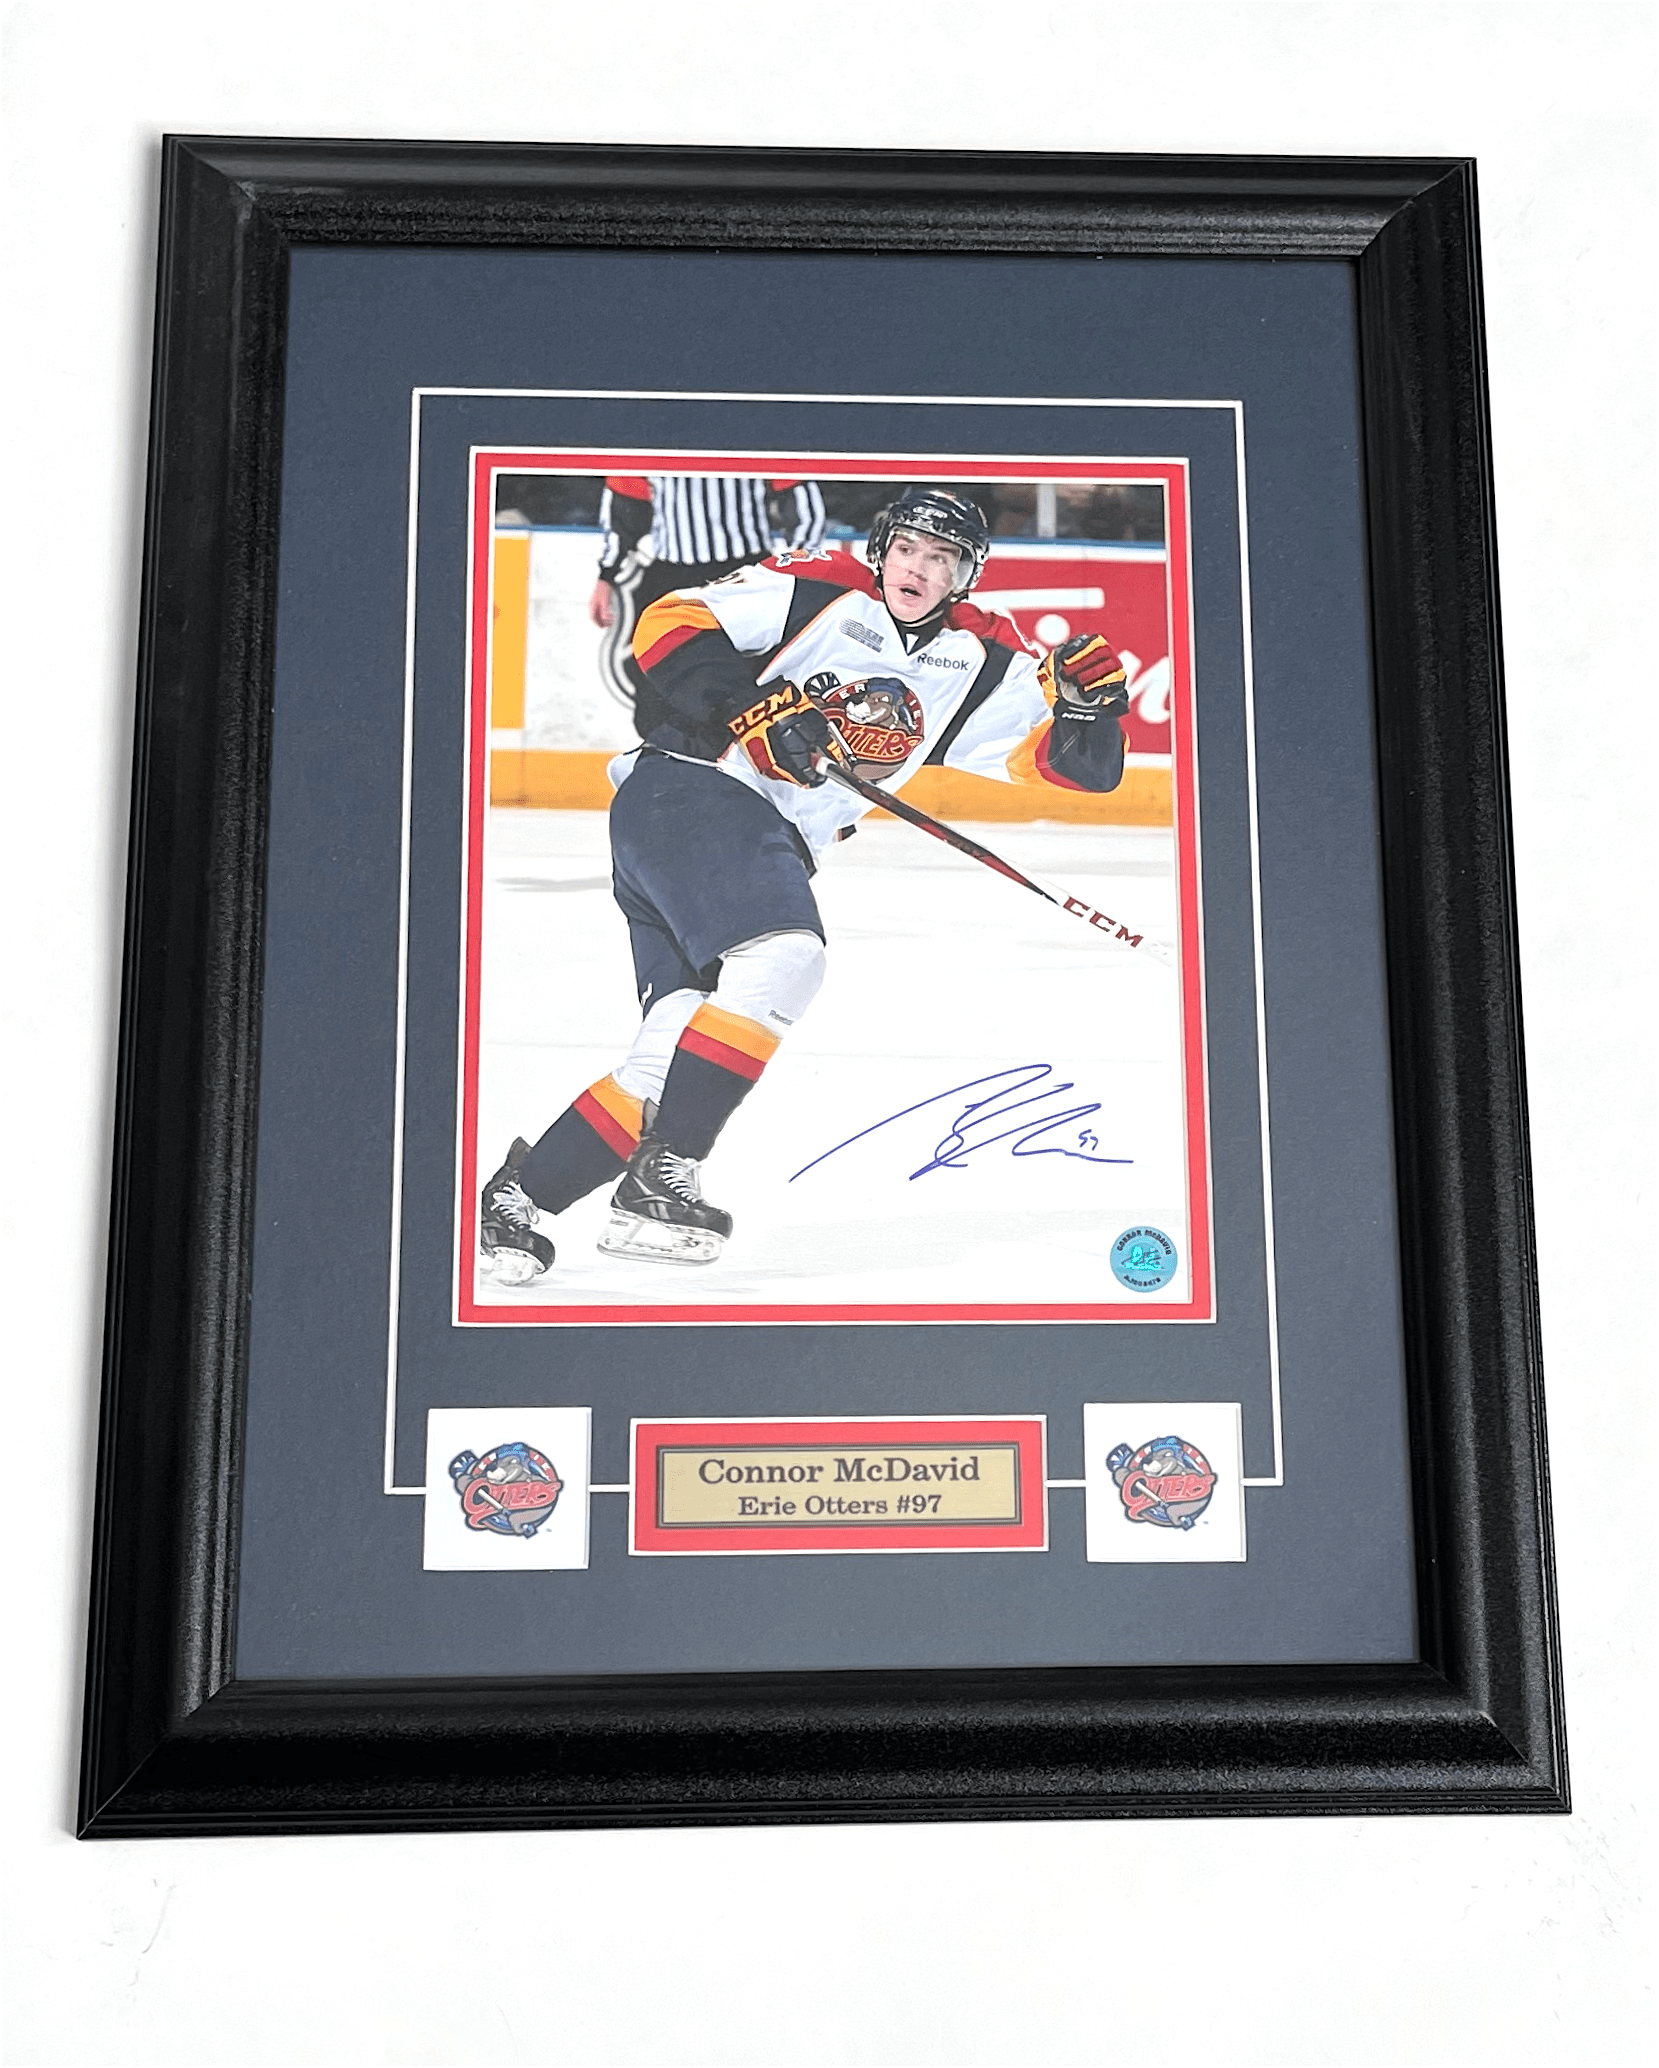 Connor Mcdavid Erie otters autographed framed 8x10 photo